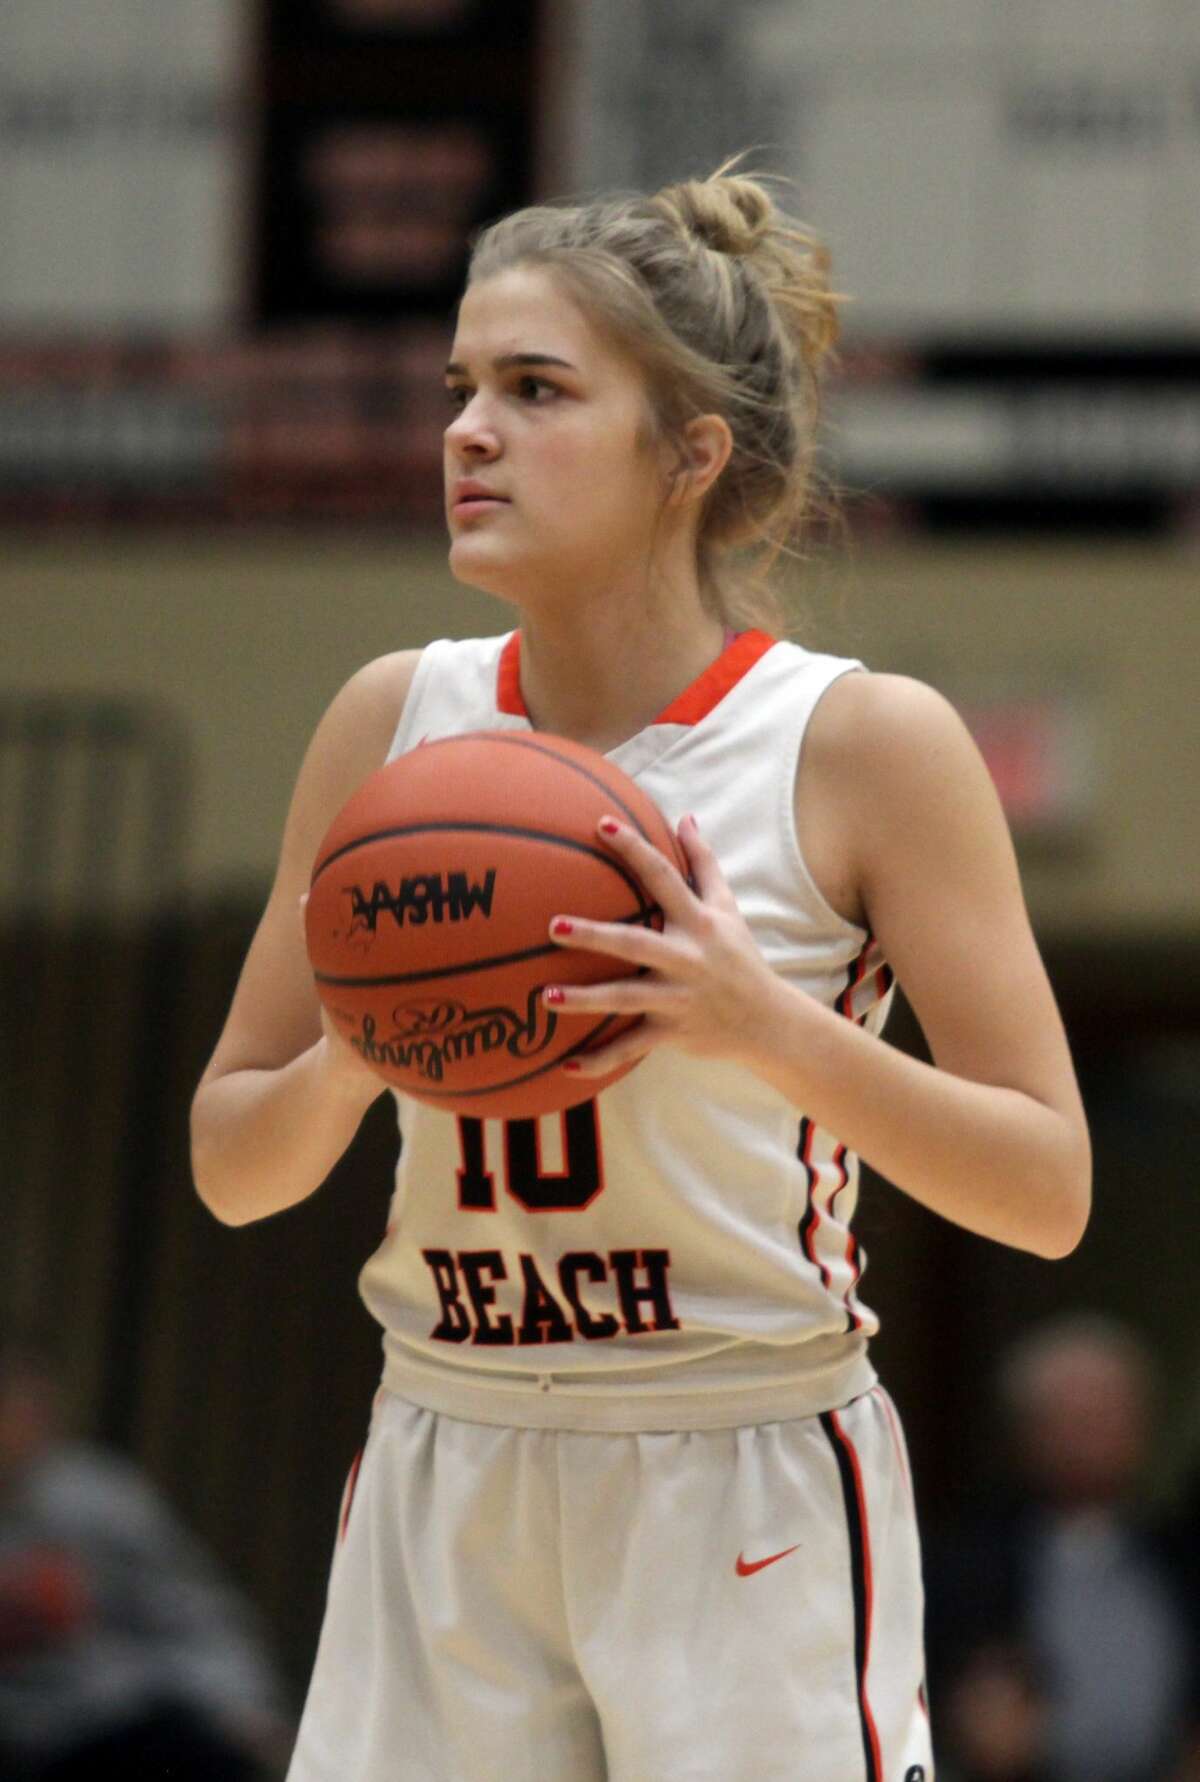 The Harbor Beach girls basketball team recorded a 68-17 win over Memphis at home on Tuesday, Feb. 25.